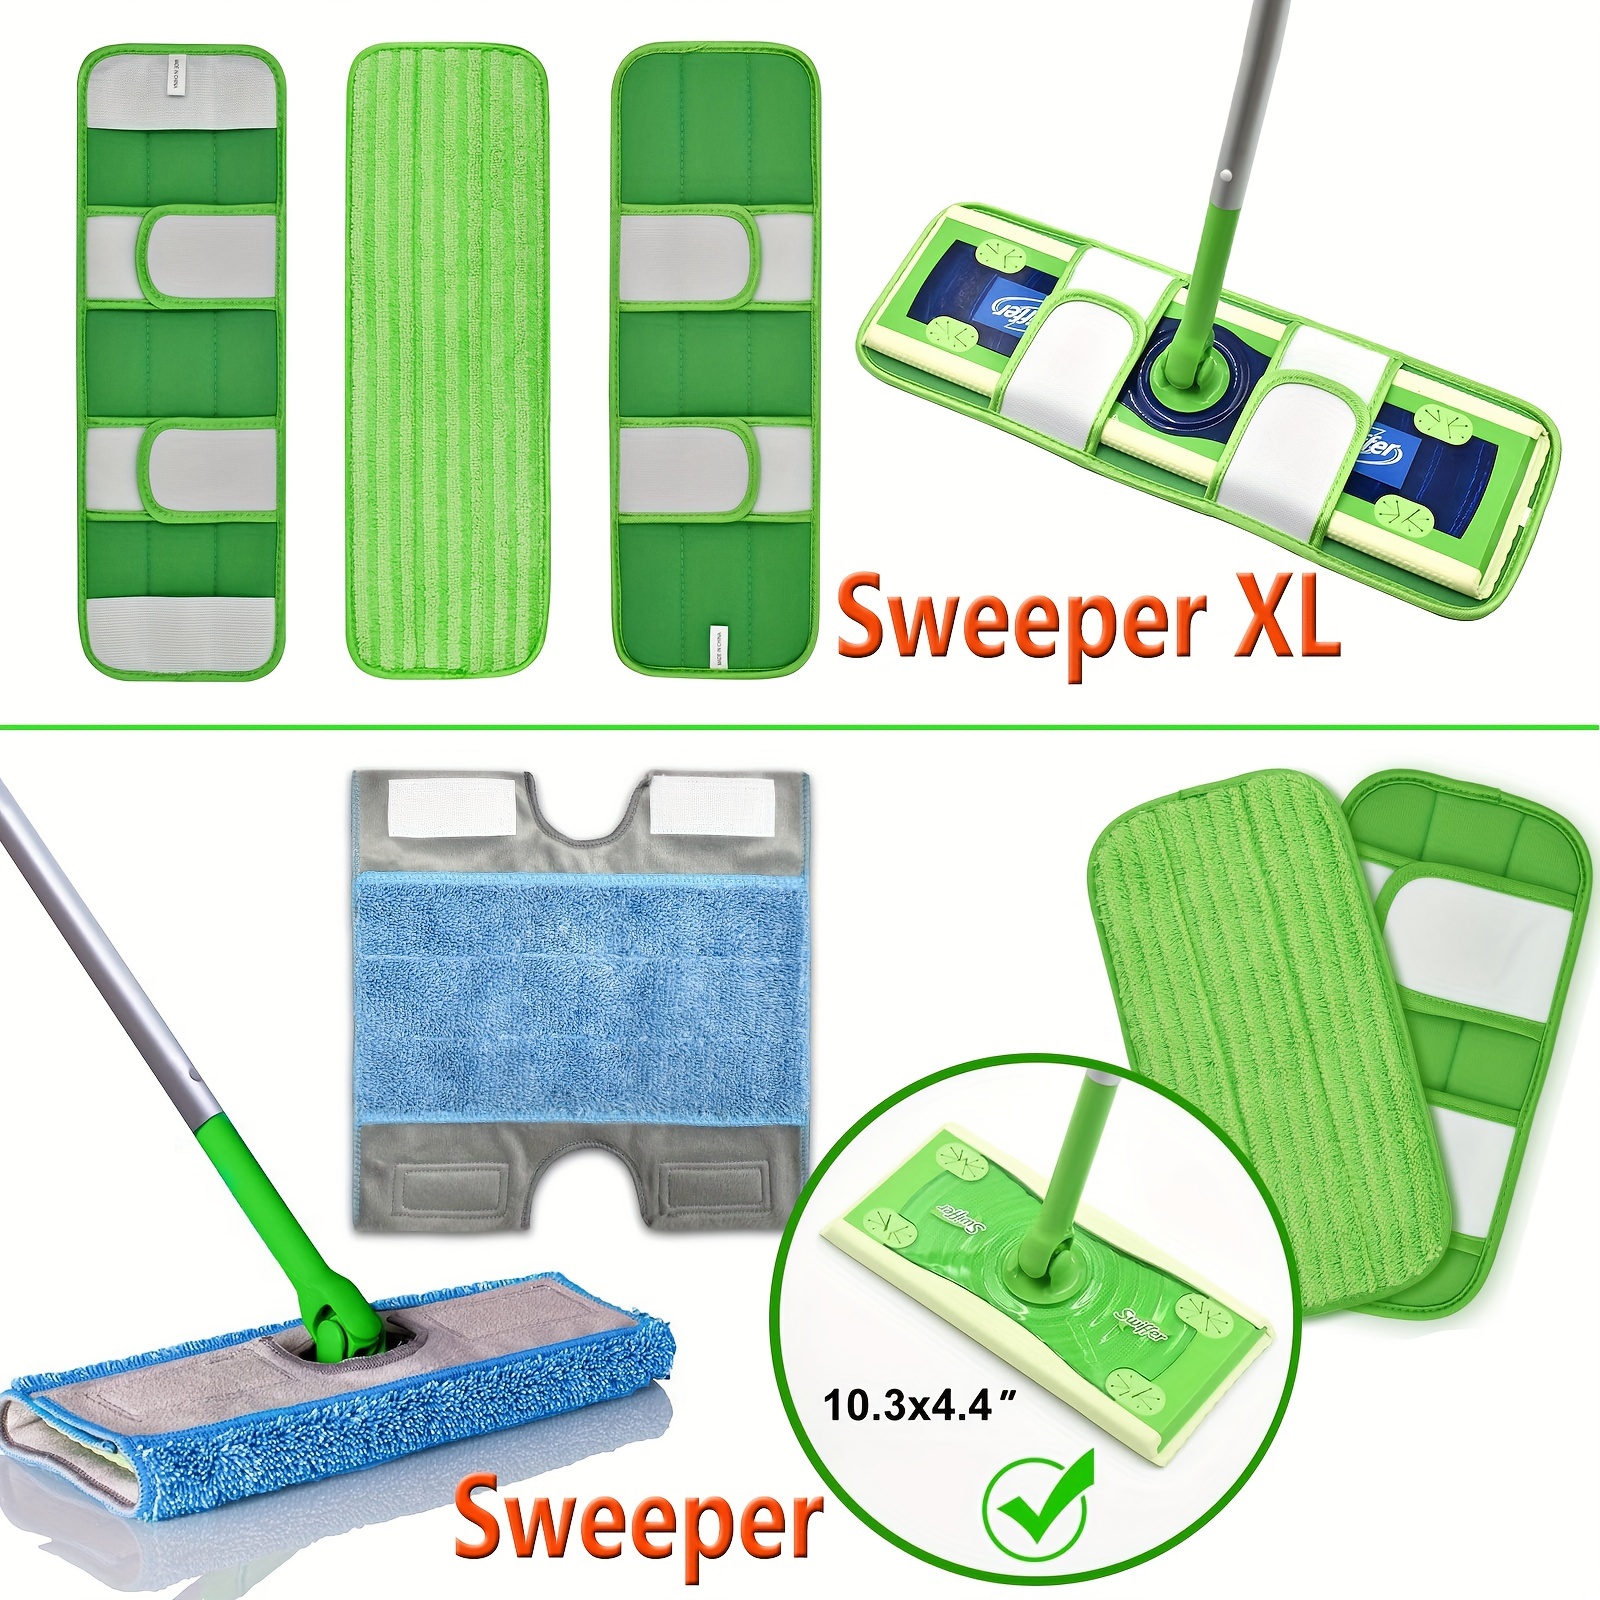 Velcro Mop Replacement, Mop Head Accessories, Swiffer Replacement